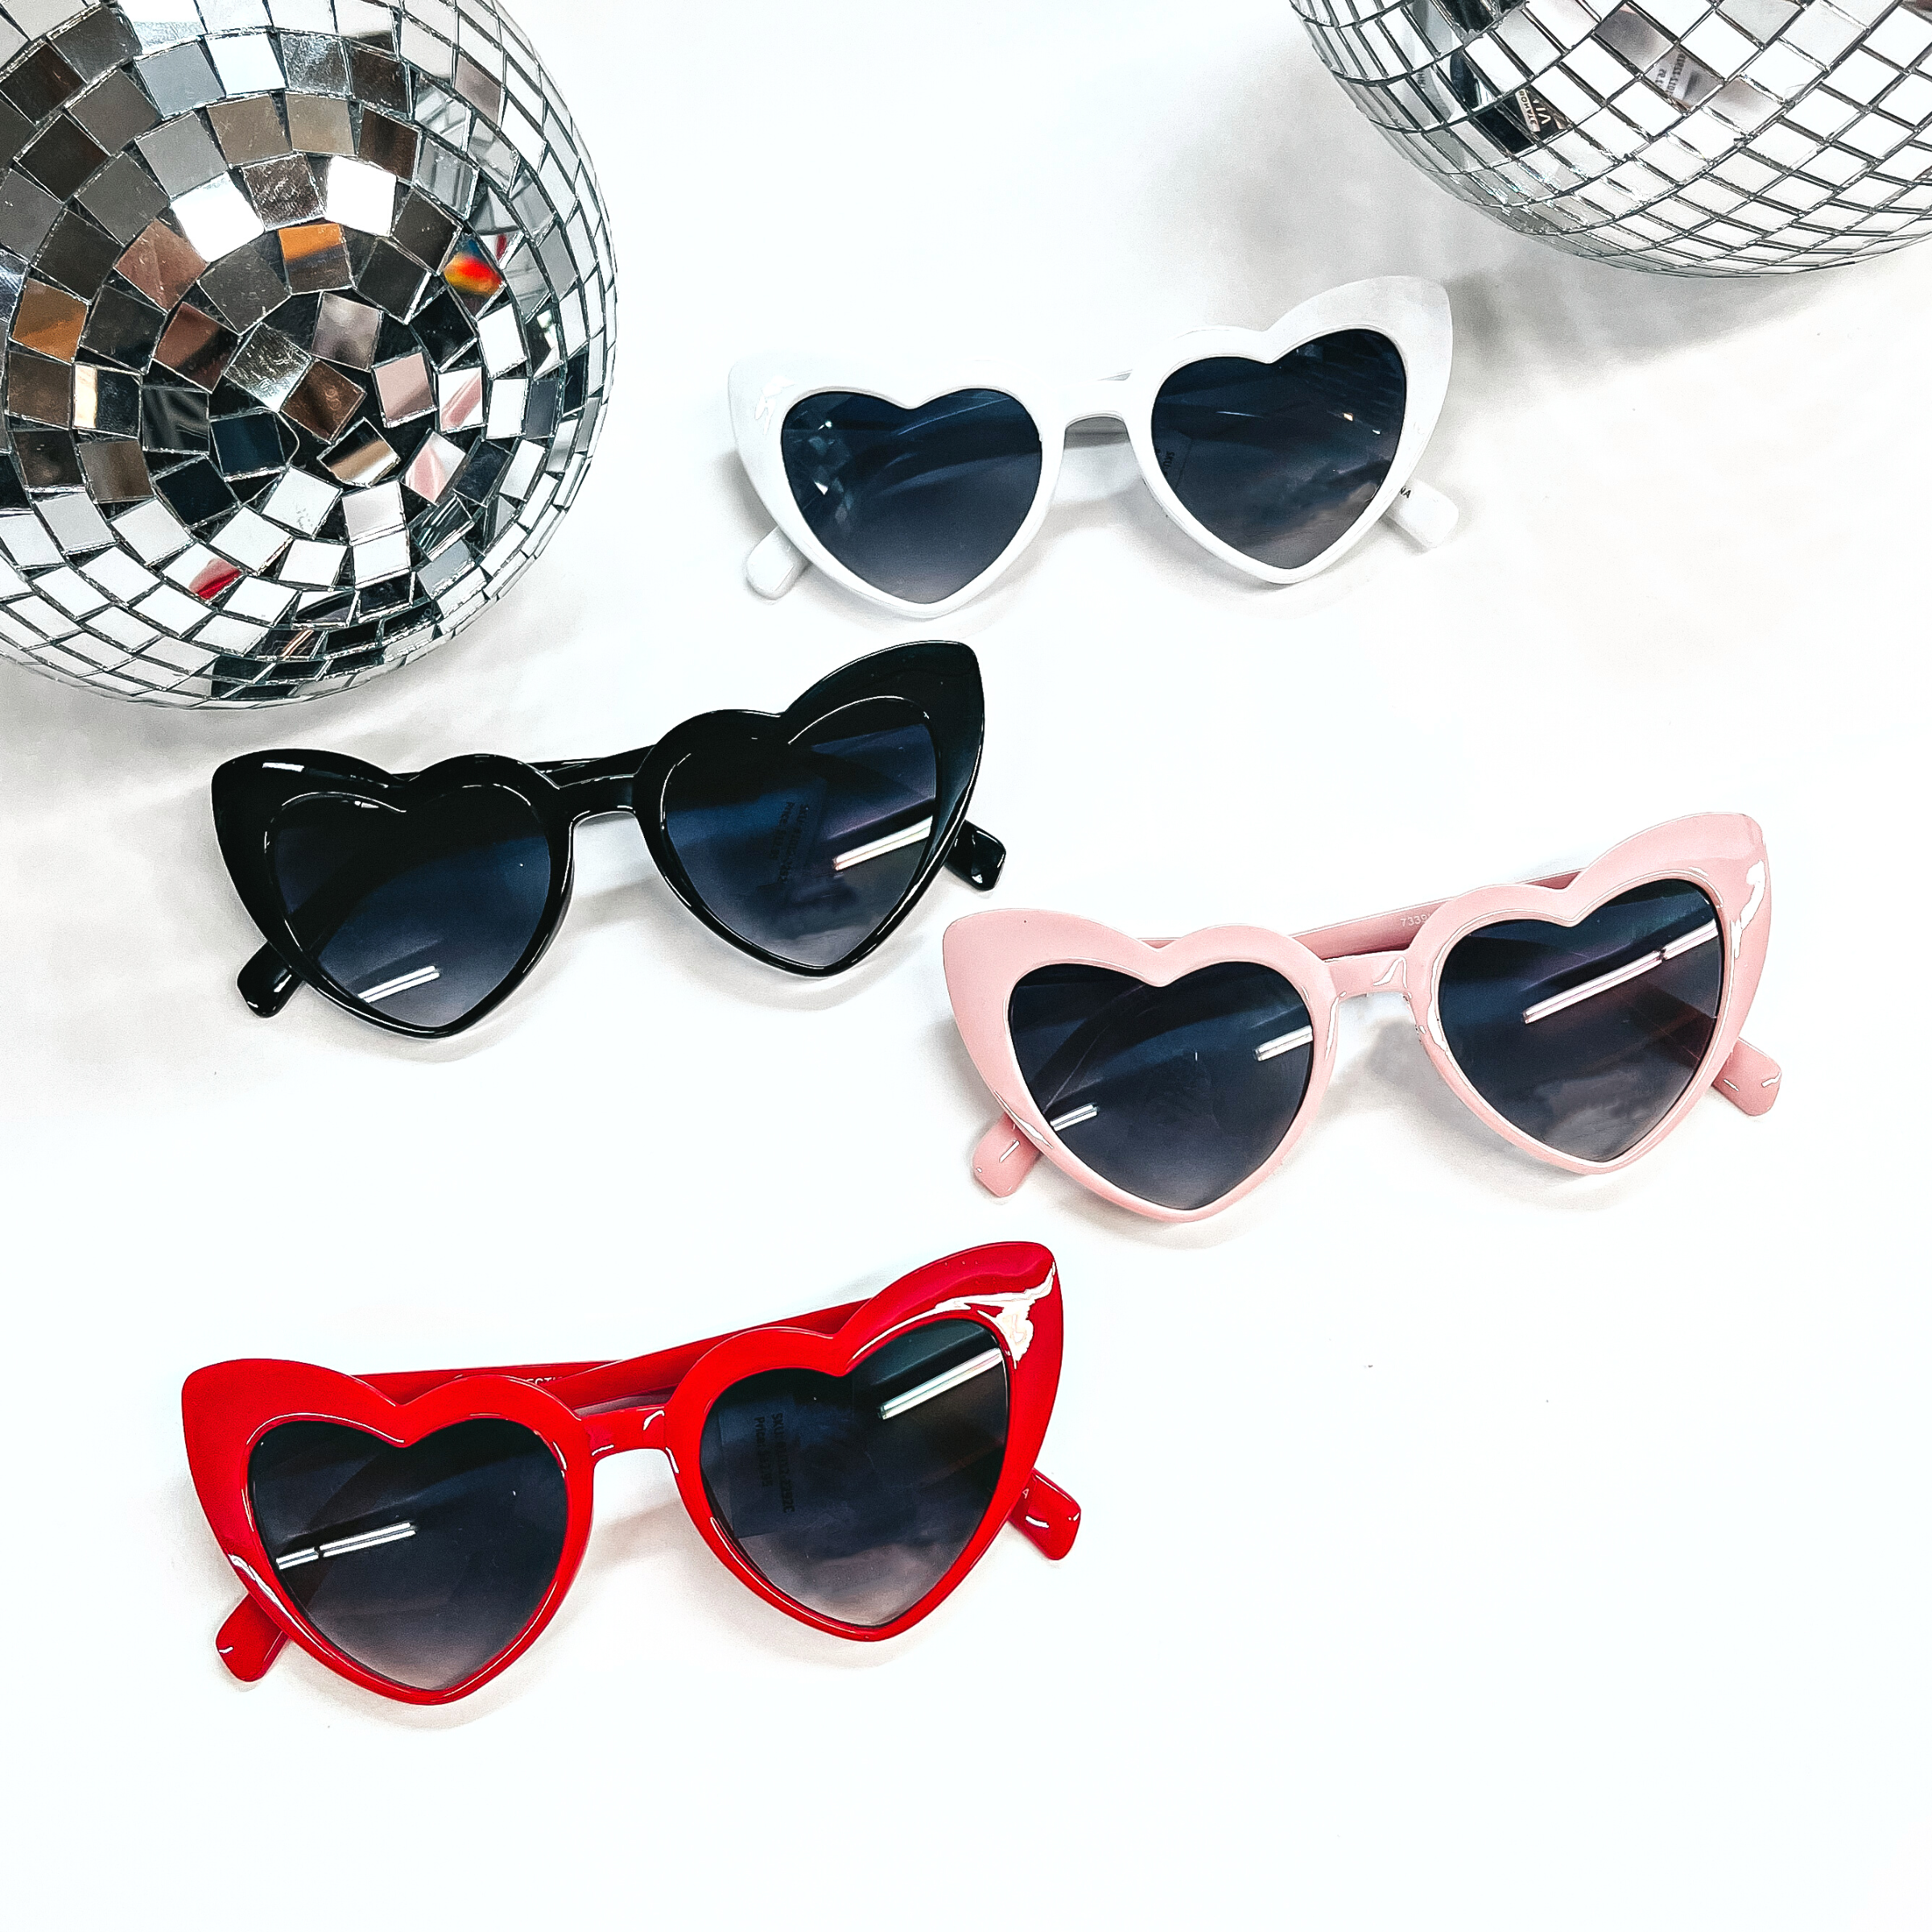 There are four heart shape sunglasses in different colors with black lenses. There are white, black, light pink, and red. All of these sunglasses are taken on a white background with two silver disco balls in the back as decor.